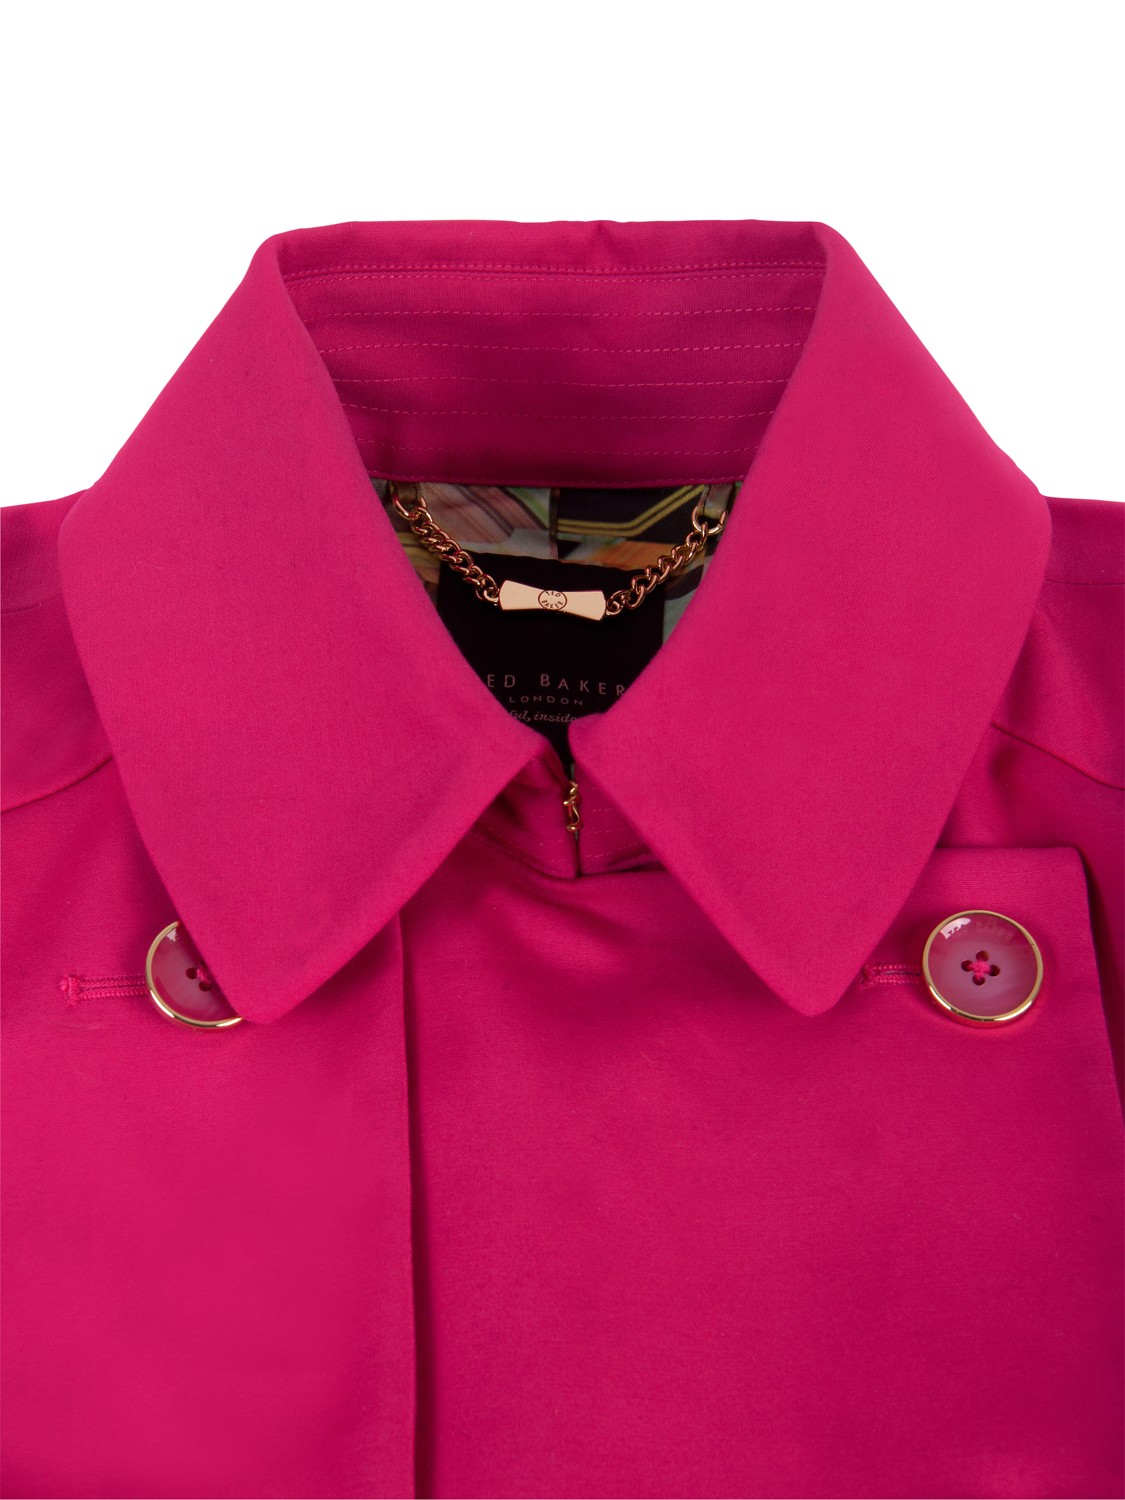 Ted Baker Carisa Double Breasted Belted Trench Coat in Pink | Lyst UK